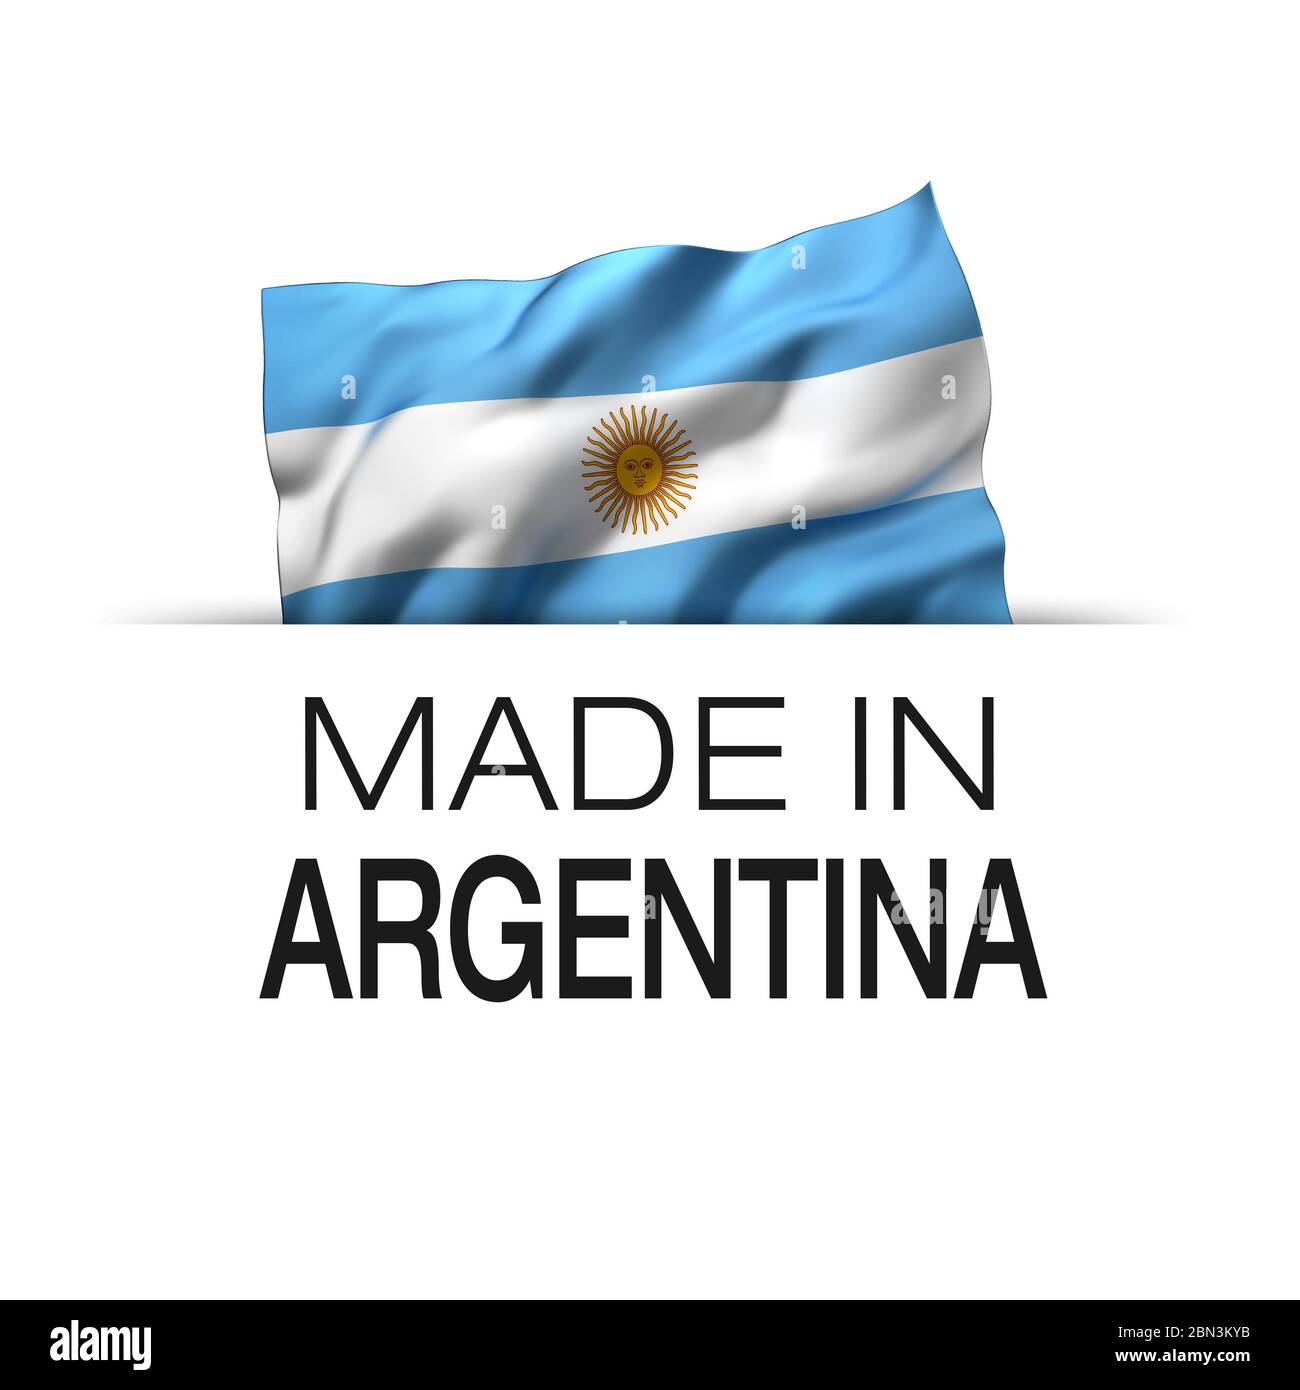 Made in Argentina - Guarantee label with a waving Argentinian flag. 3D illustration. Stock Photo